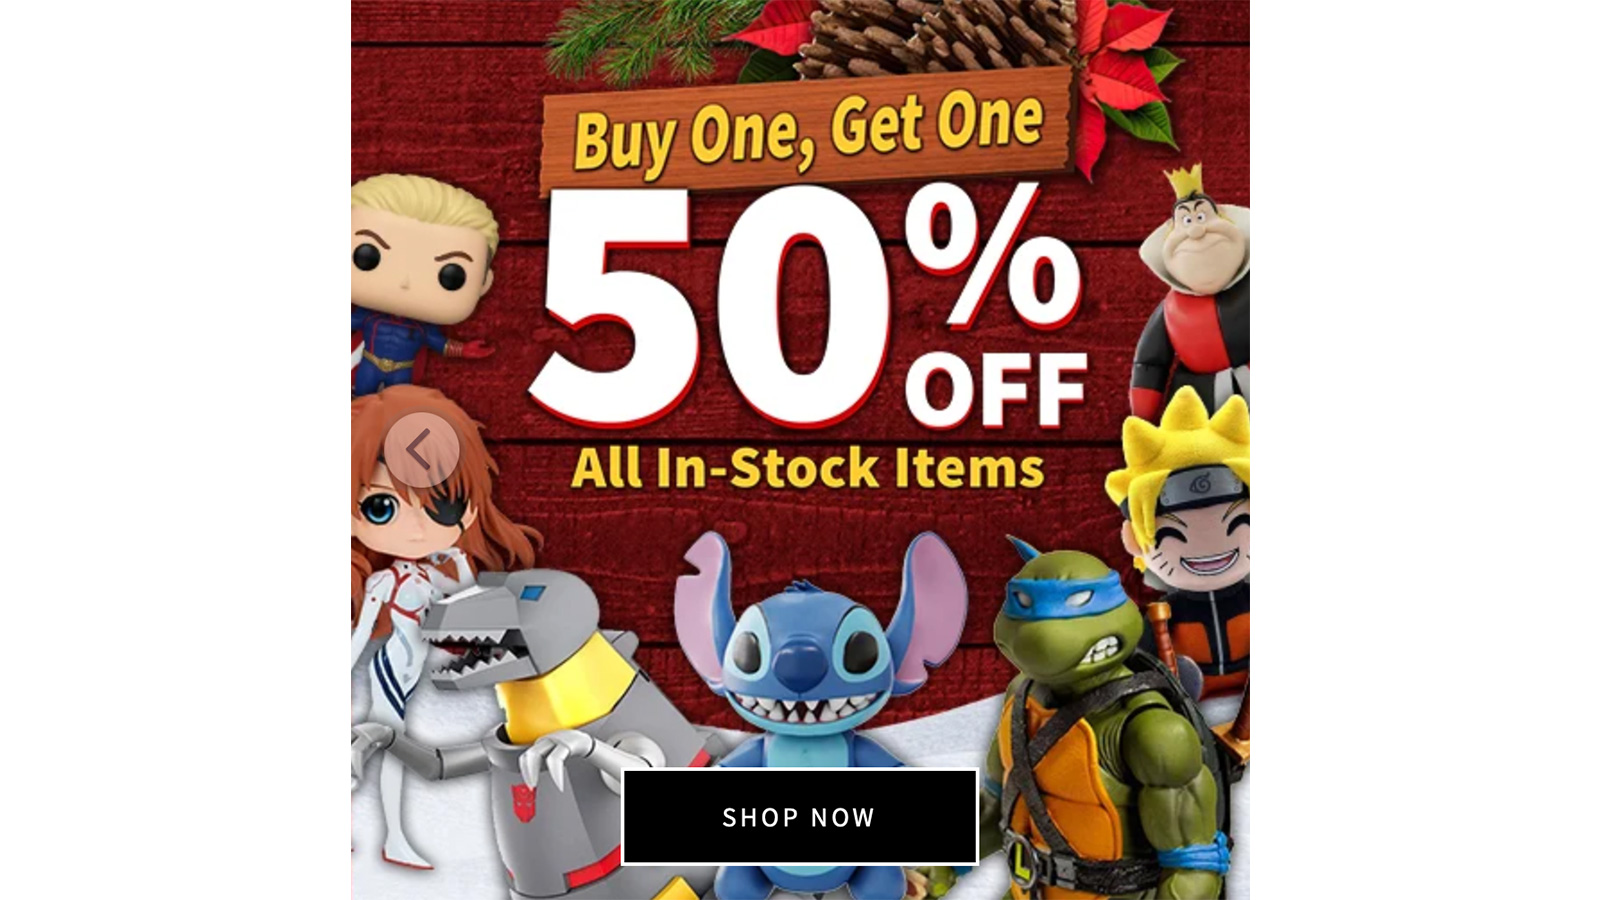 Entertainment Earth BOGO 50% Off In Stock Products And Extra 10% Off With Exclusive Link